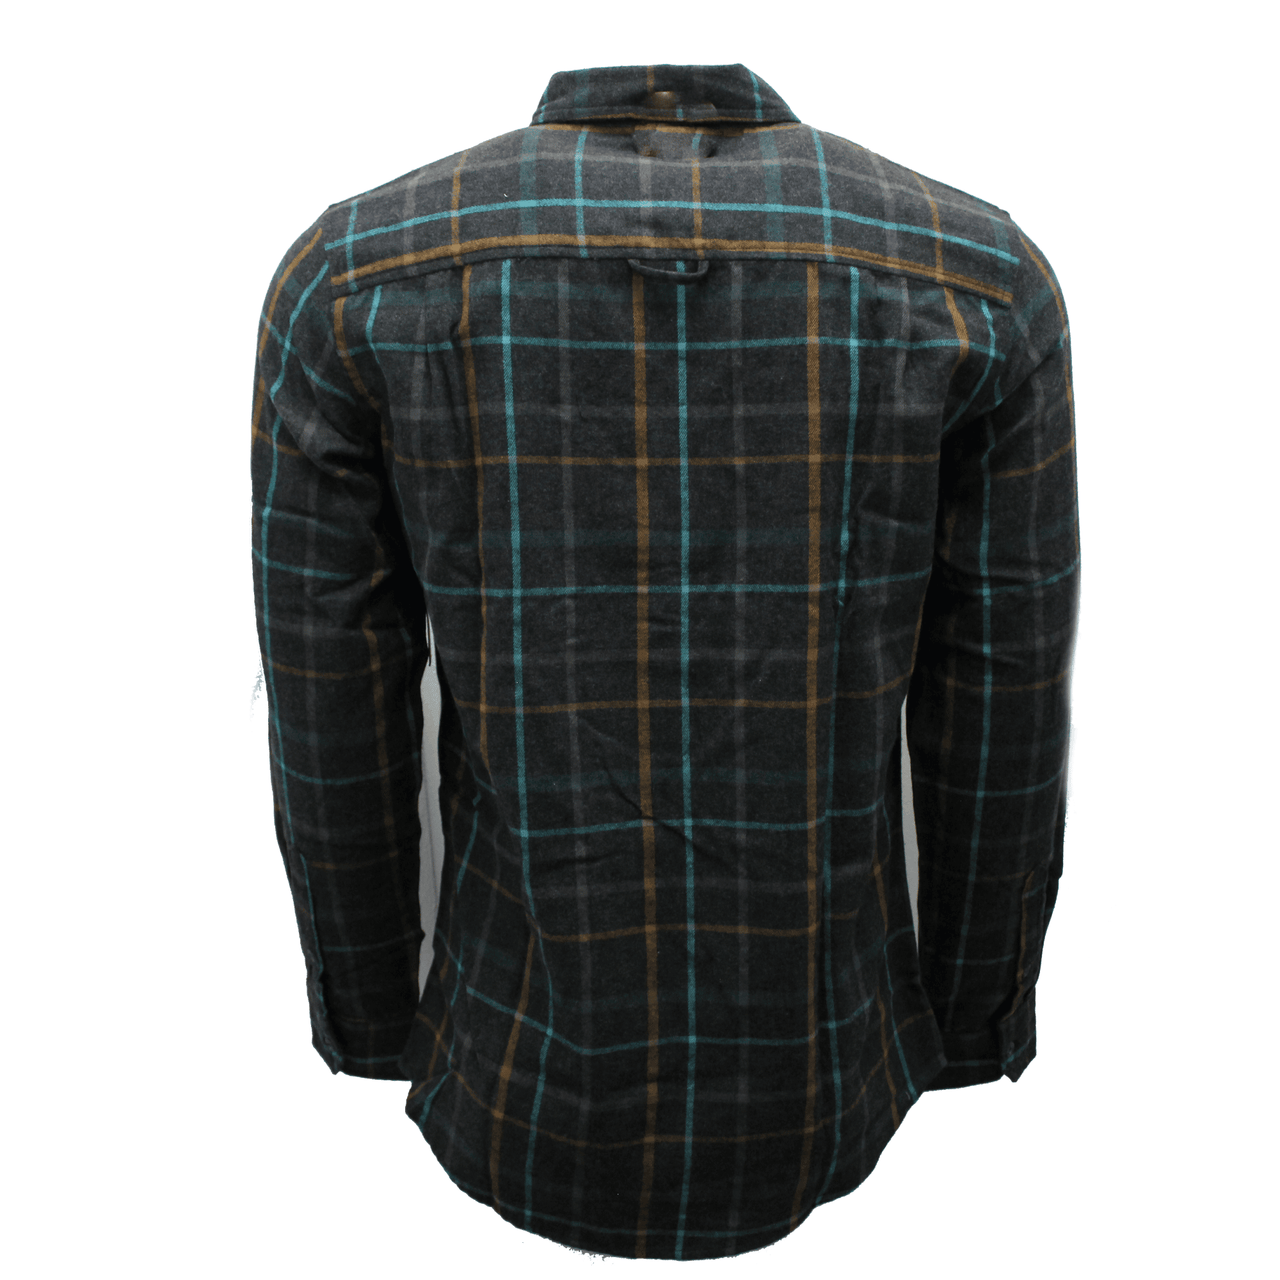 Charcoal and Teal Plaid Flannel